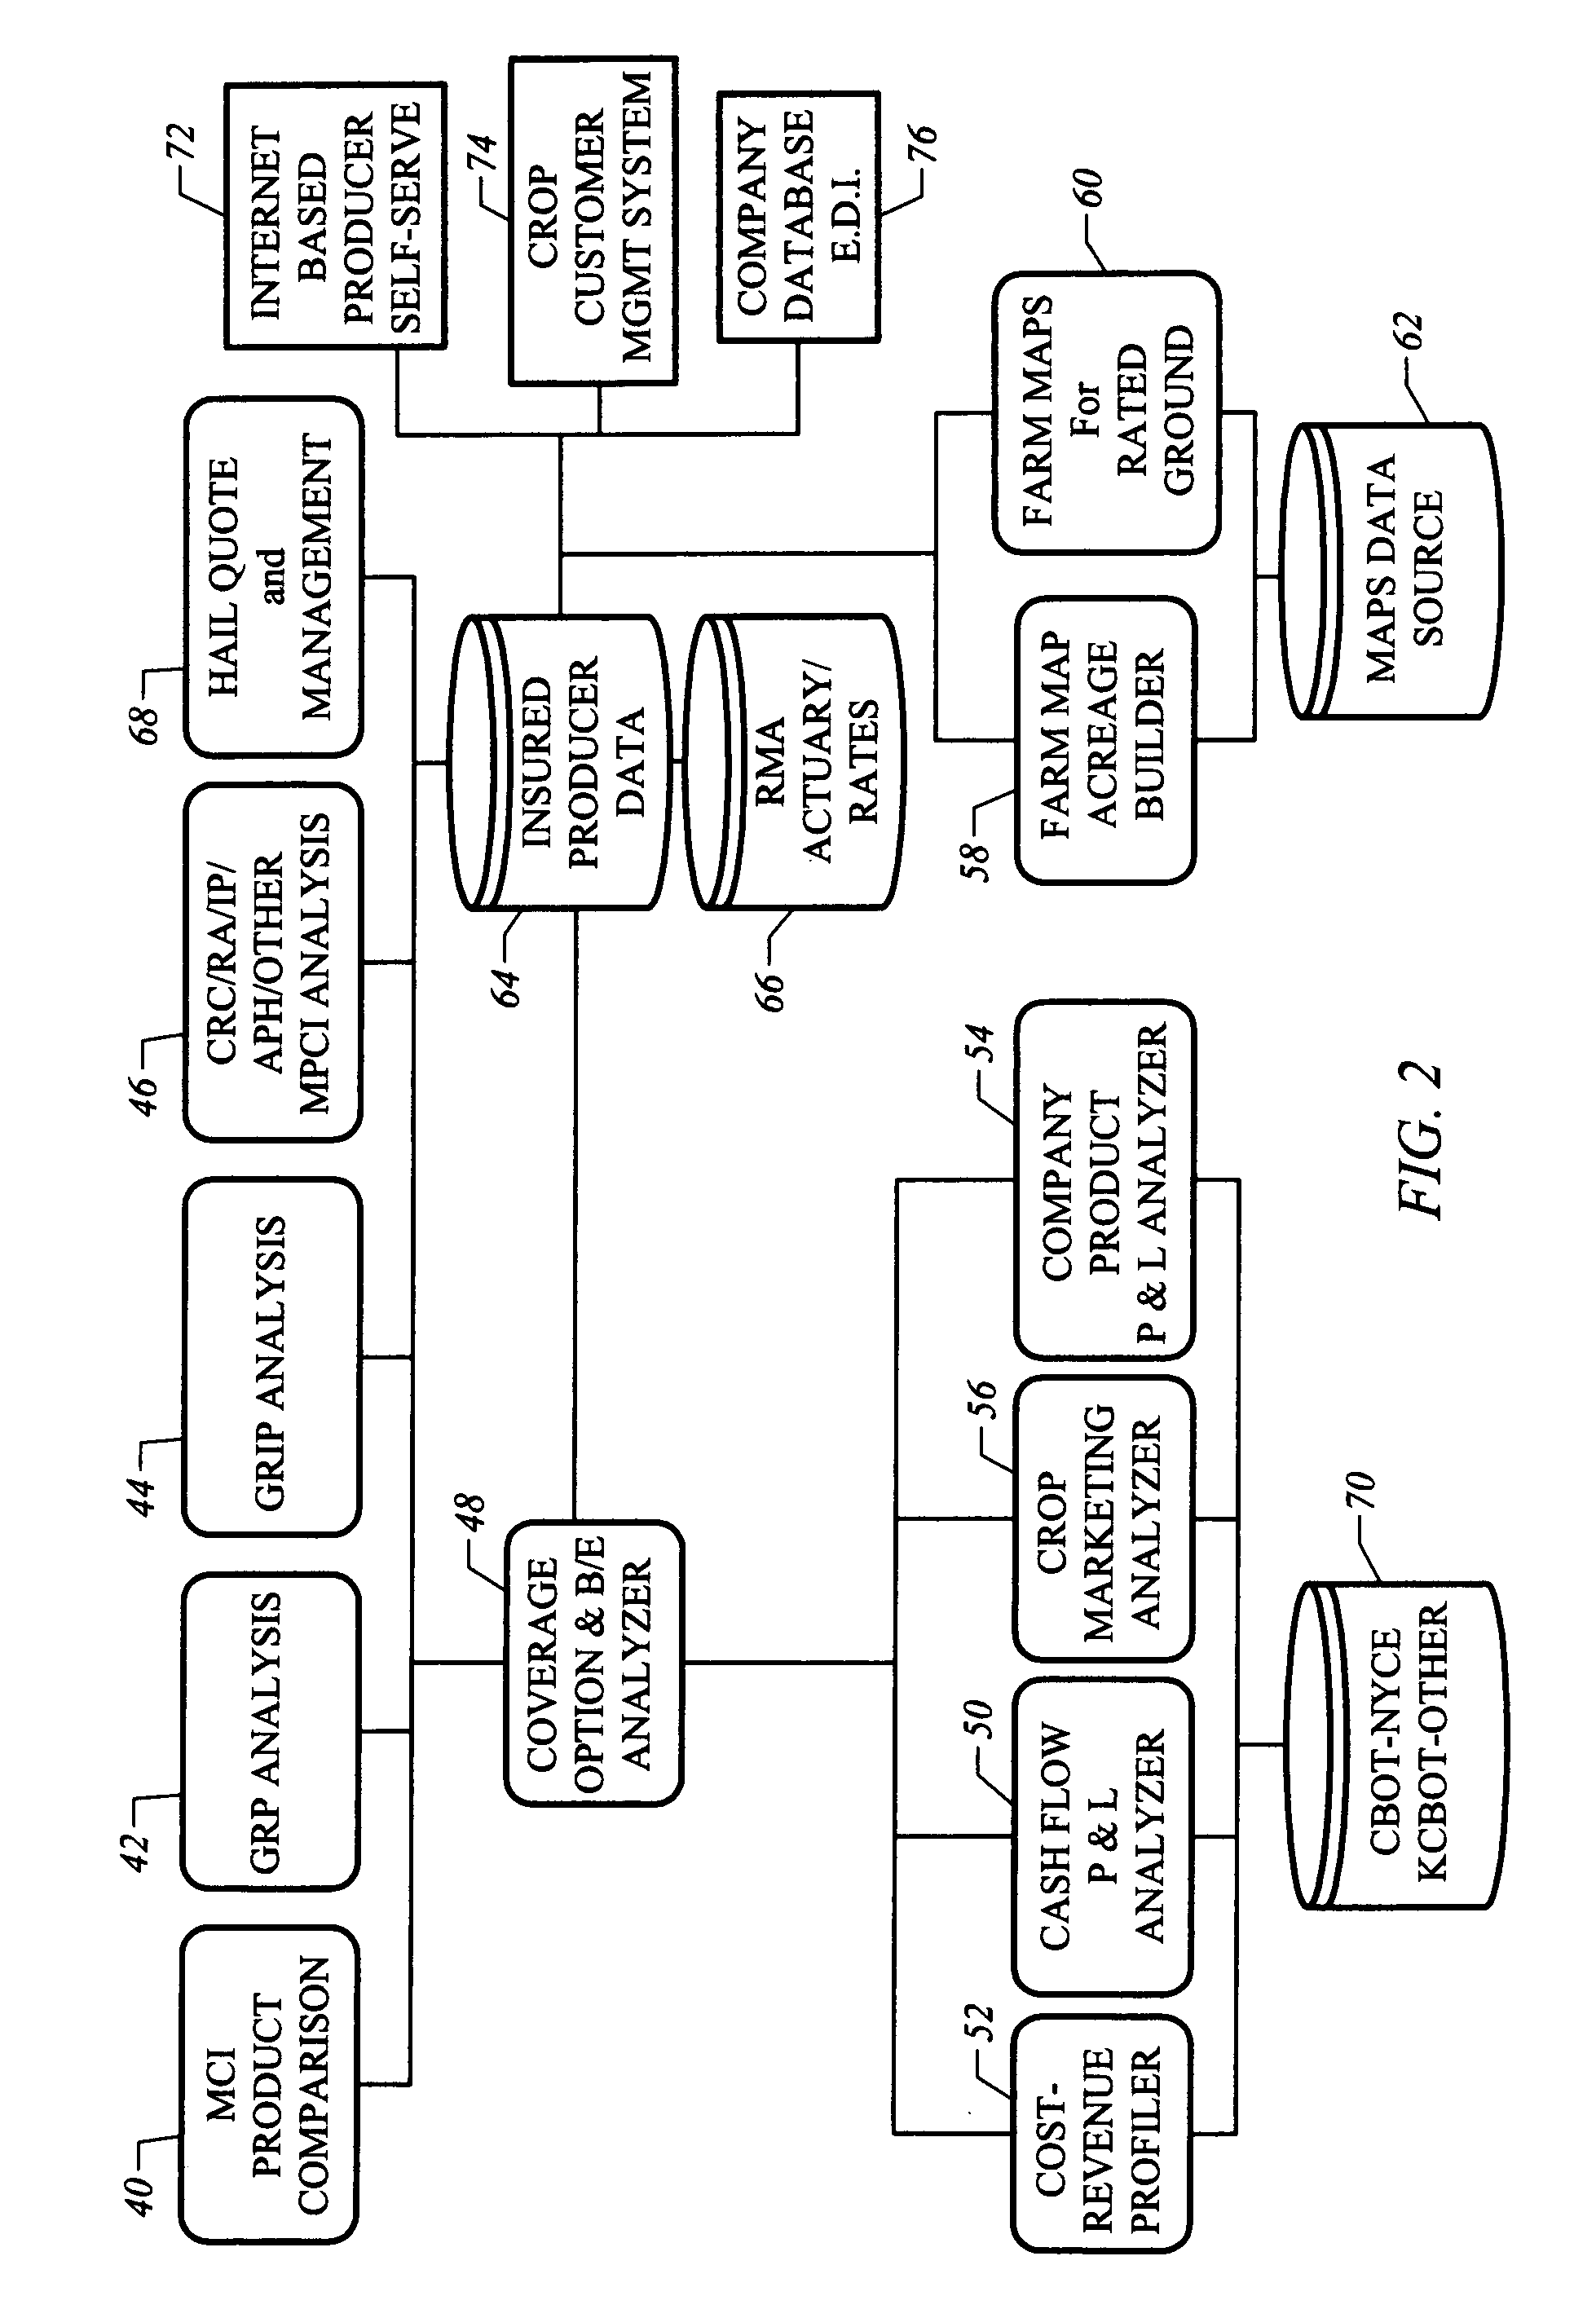 System and method to evaluate crop insurance plans